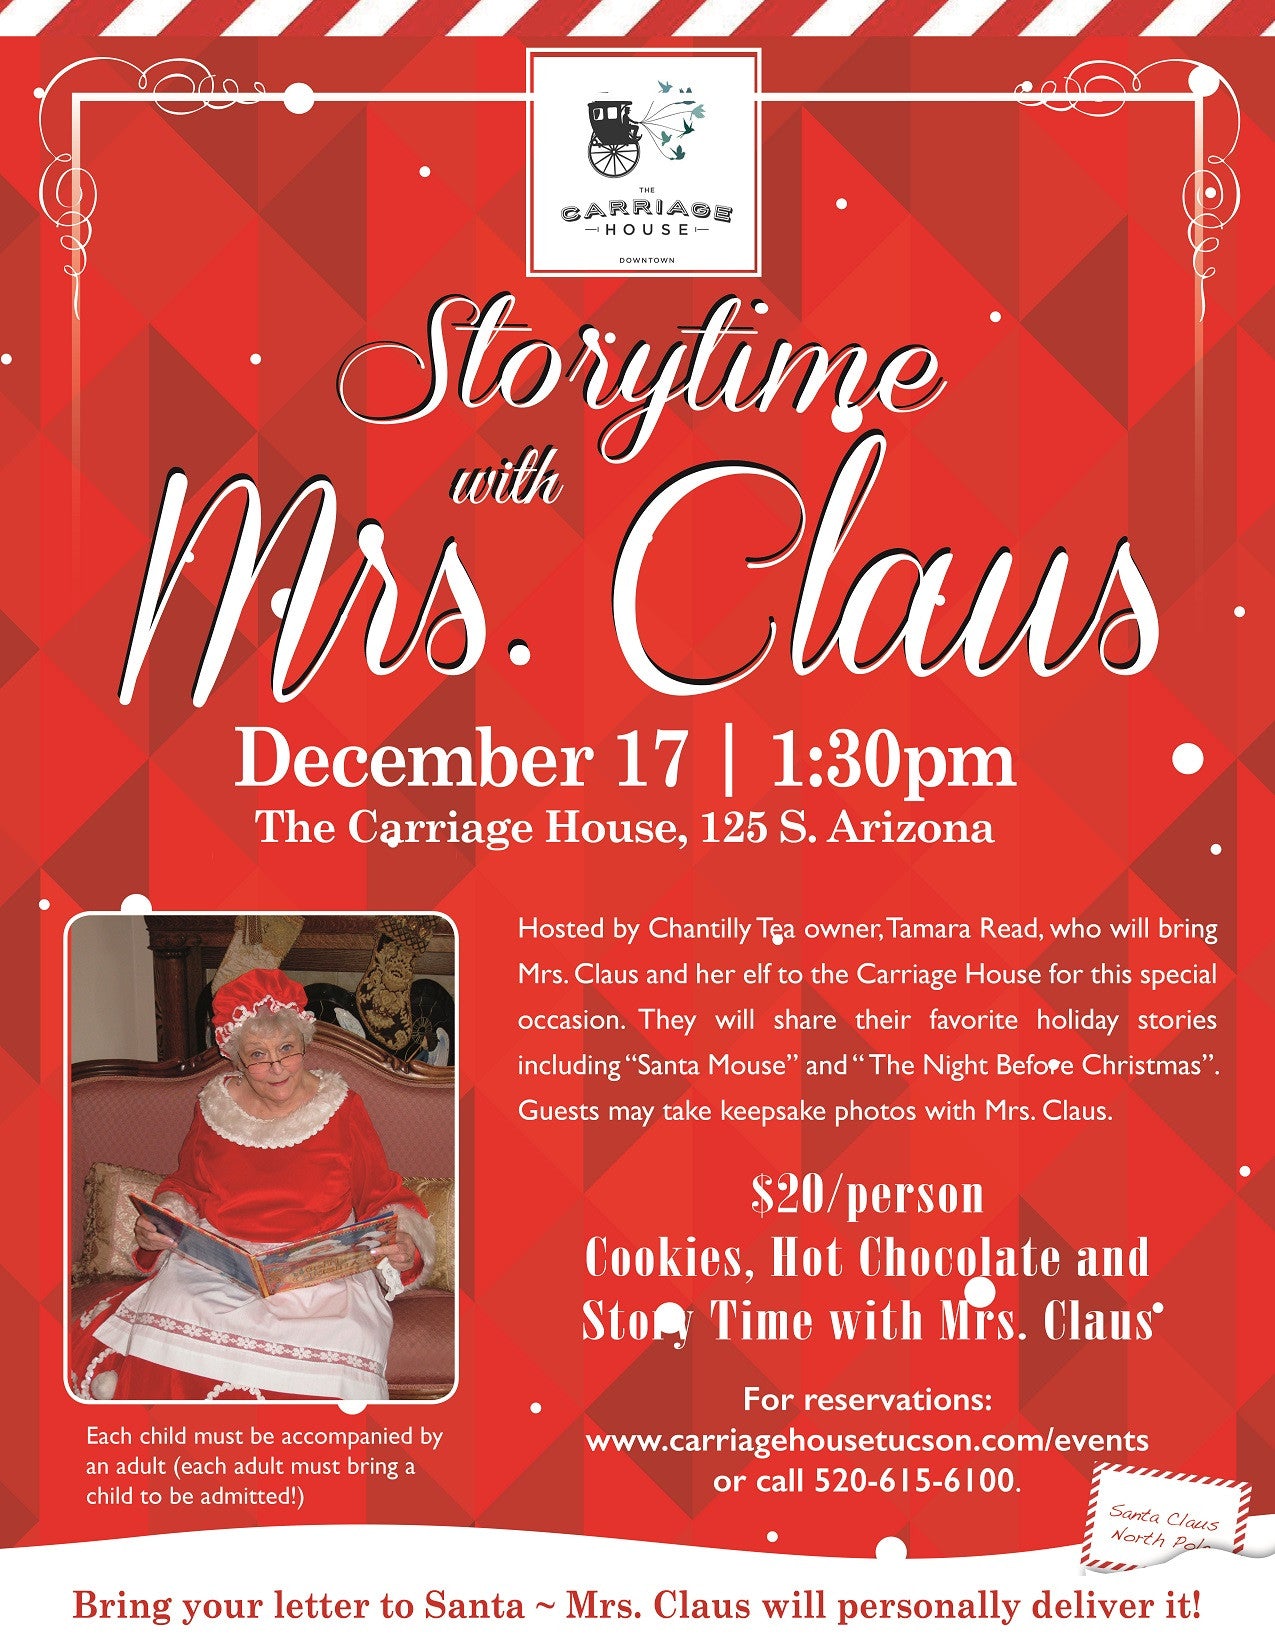 Storytime with Mrs. Claus